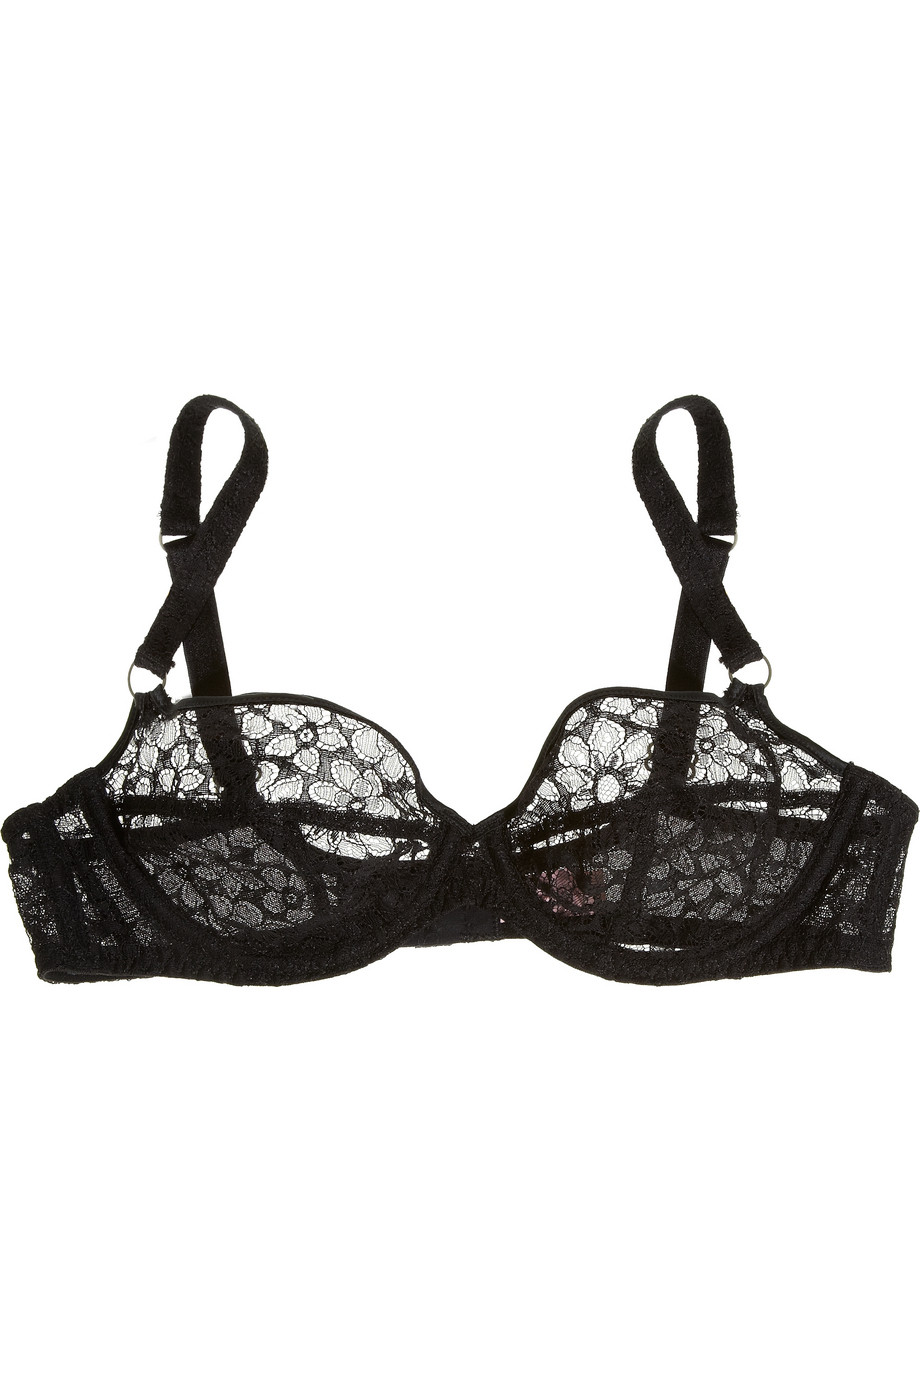 Lyst - Agent Provocateur Sidonie Floral Lace Underwired Bra in Black